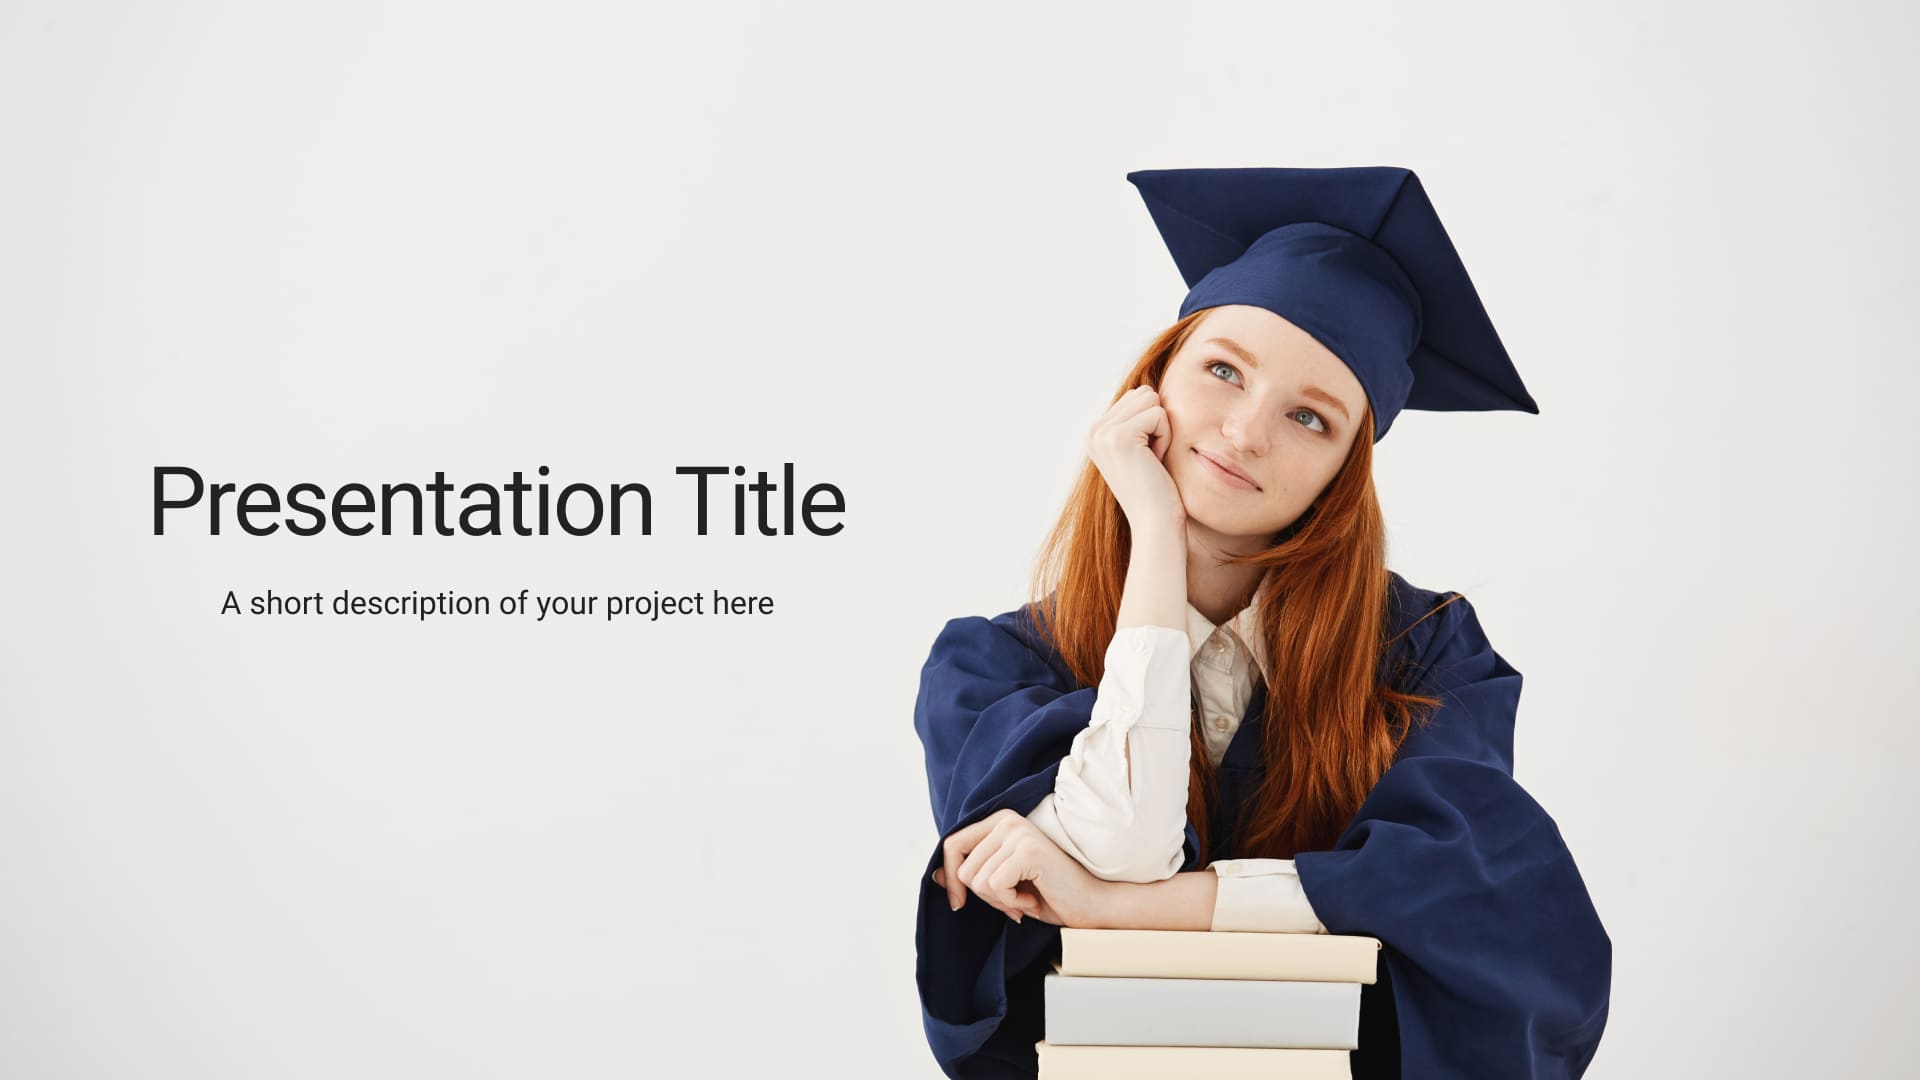 Title page of the presentation with the graduate.